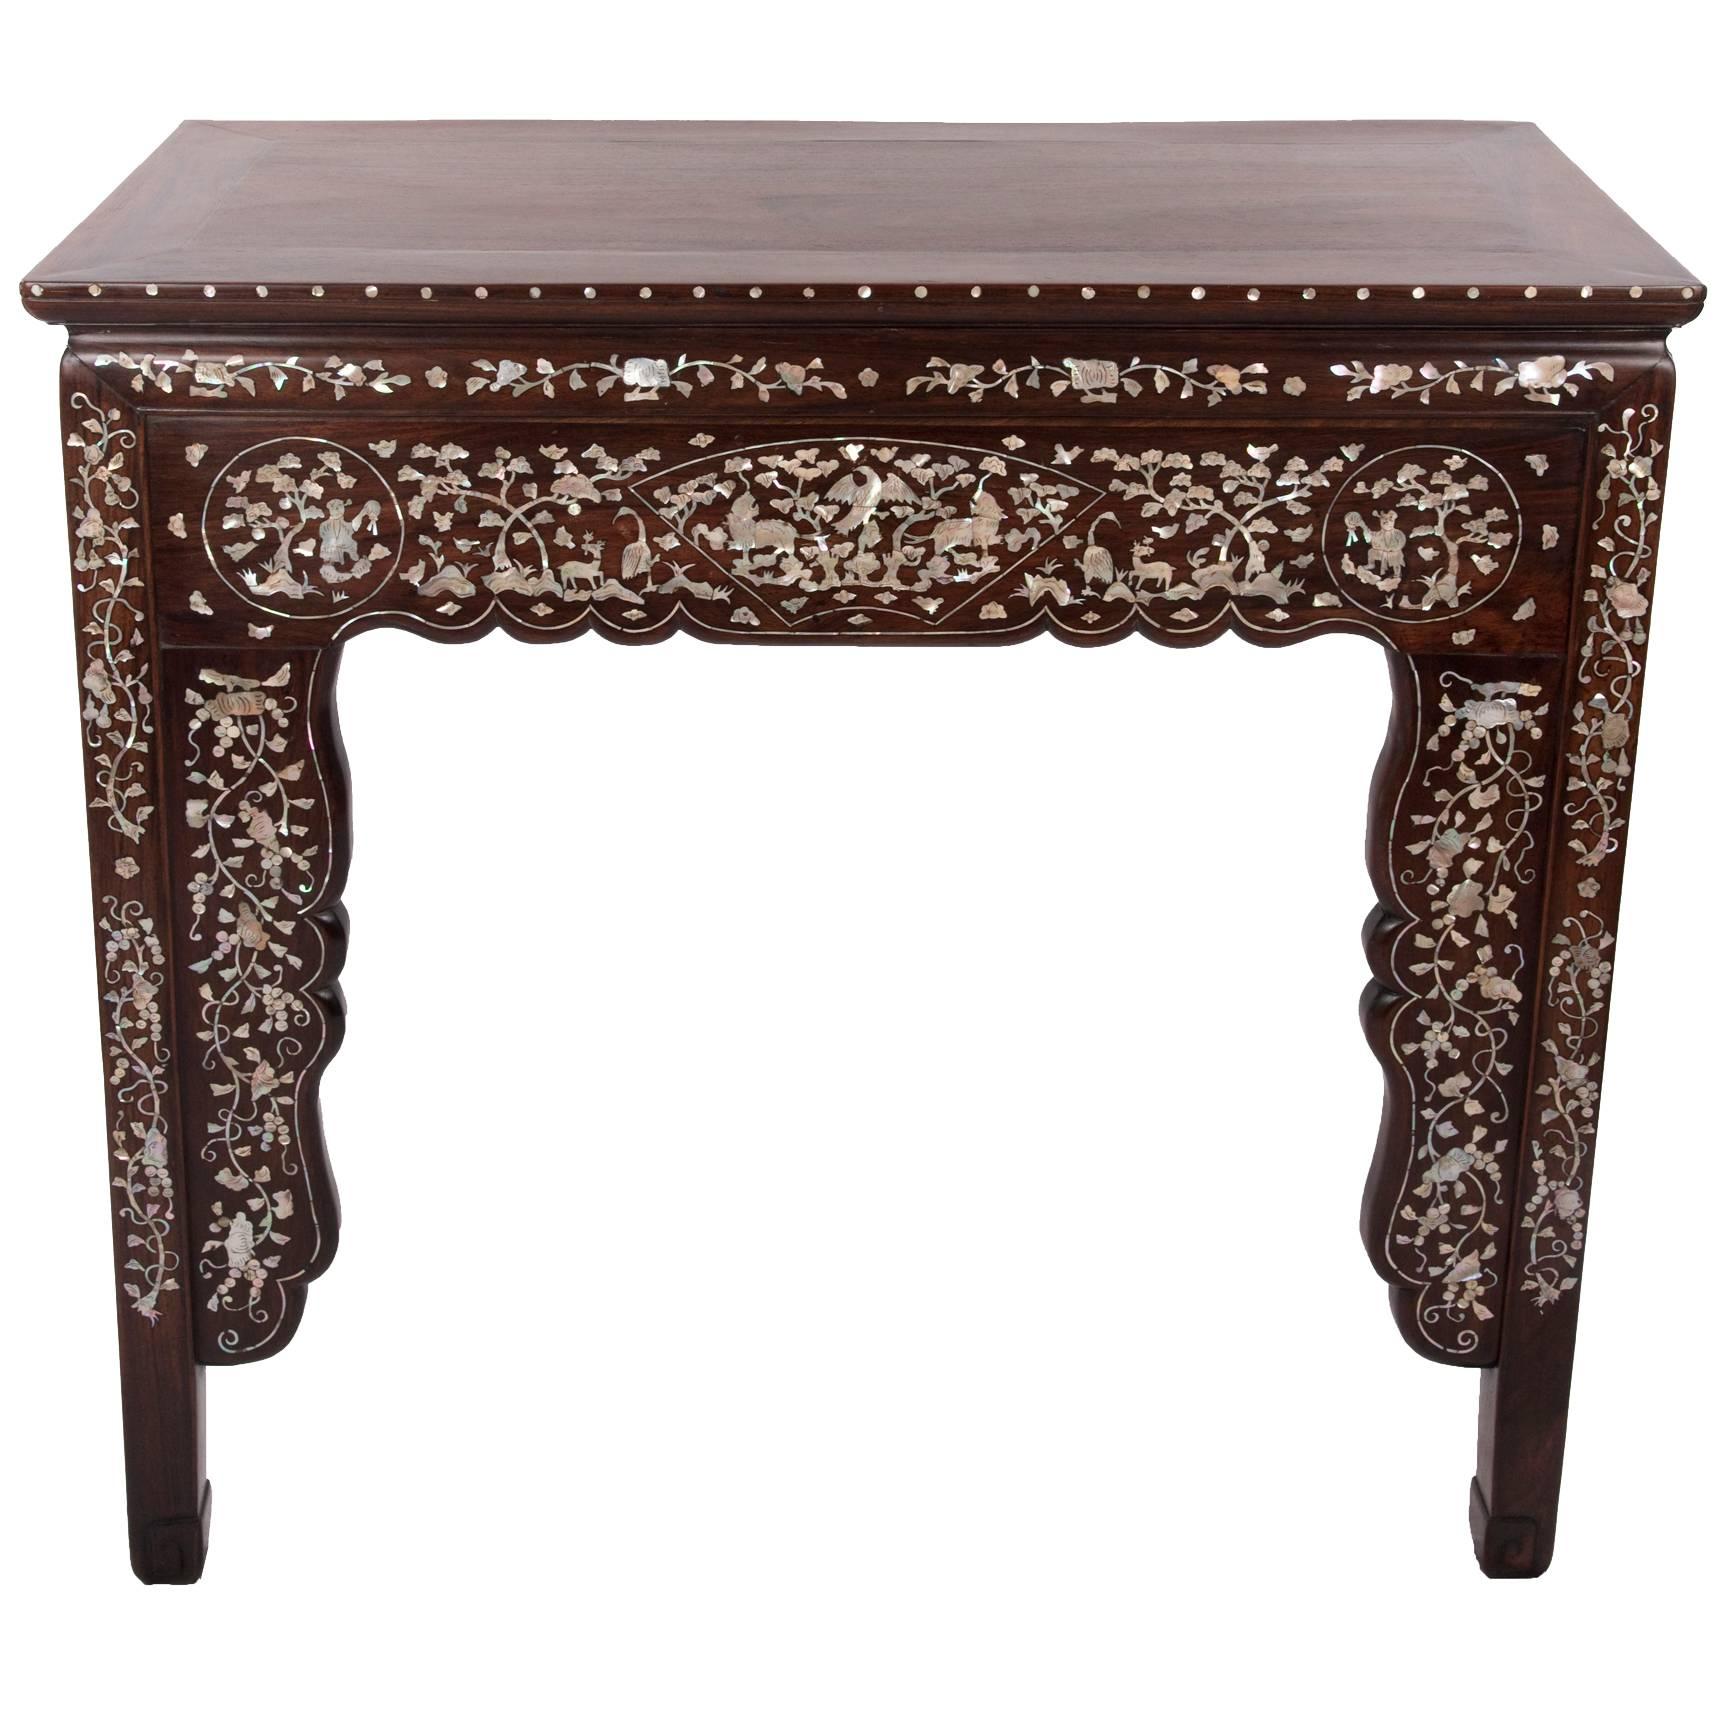 19th Century Qing Dynasty Hardwood and Mother-of-pearl Inlaid Console Table